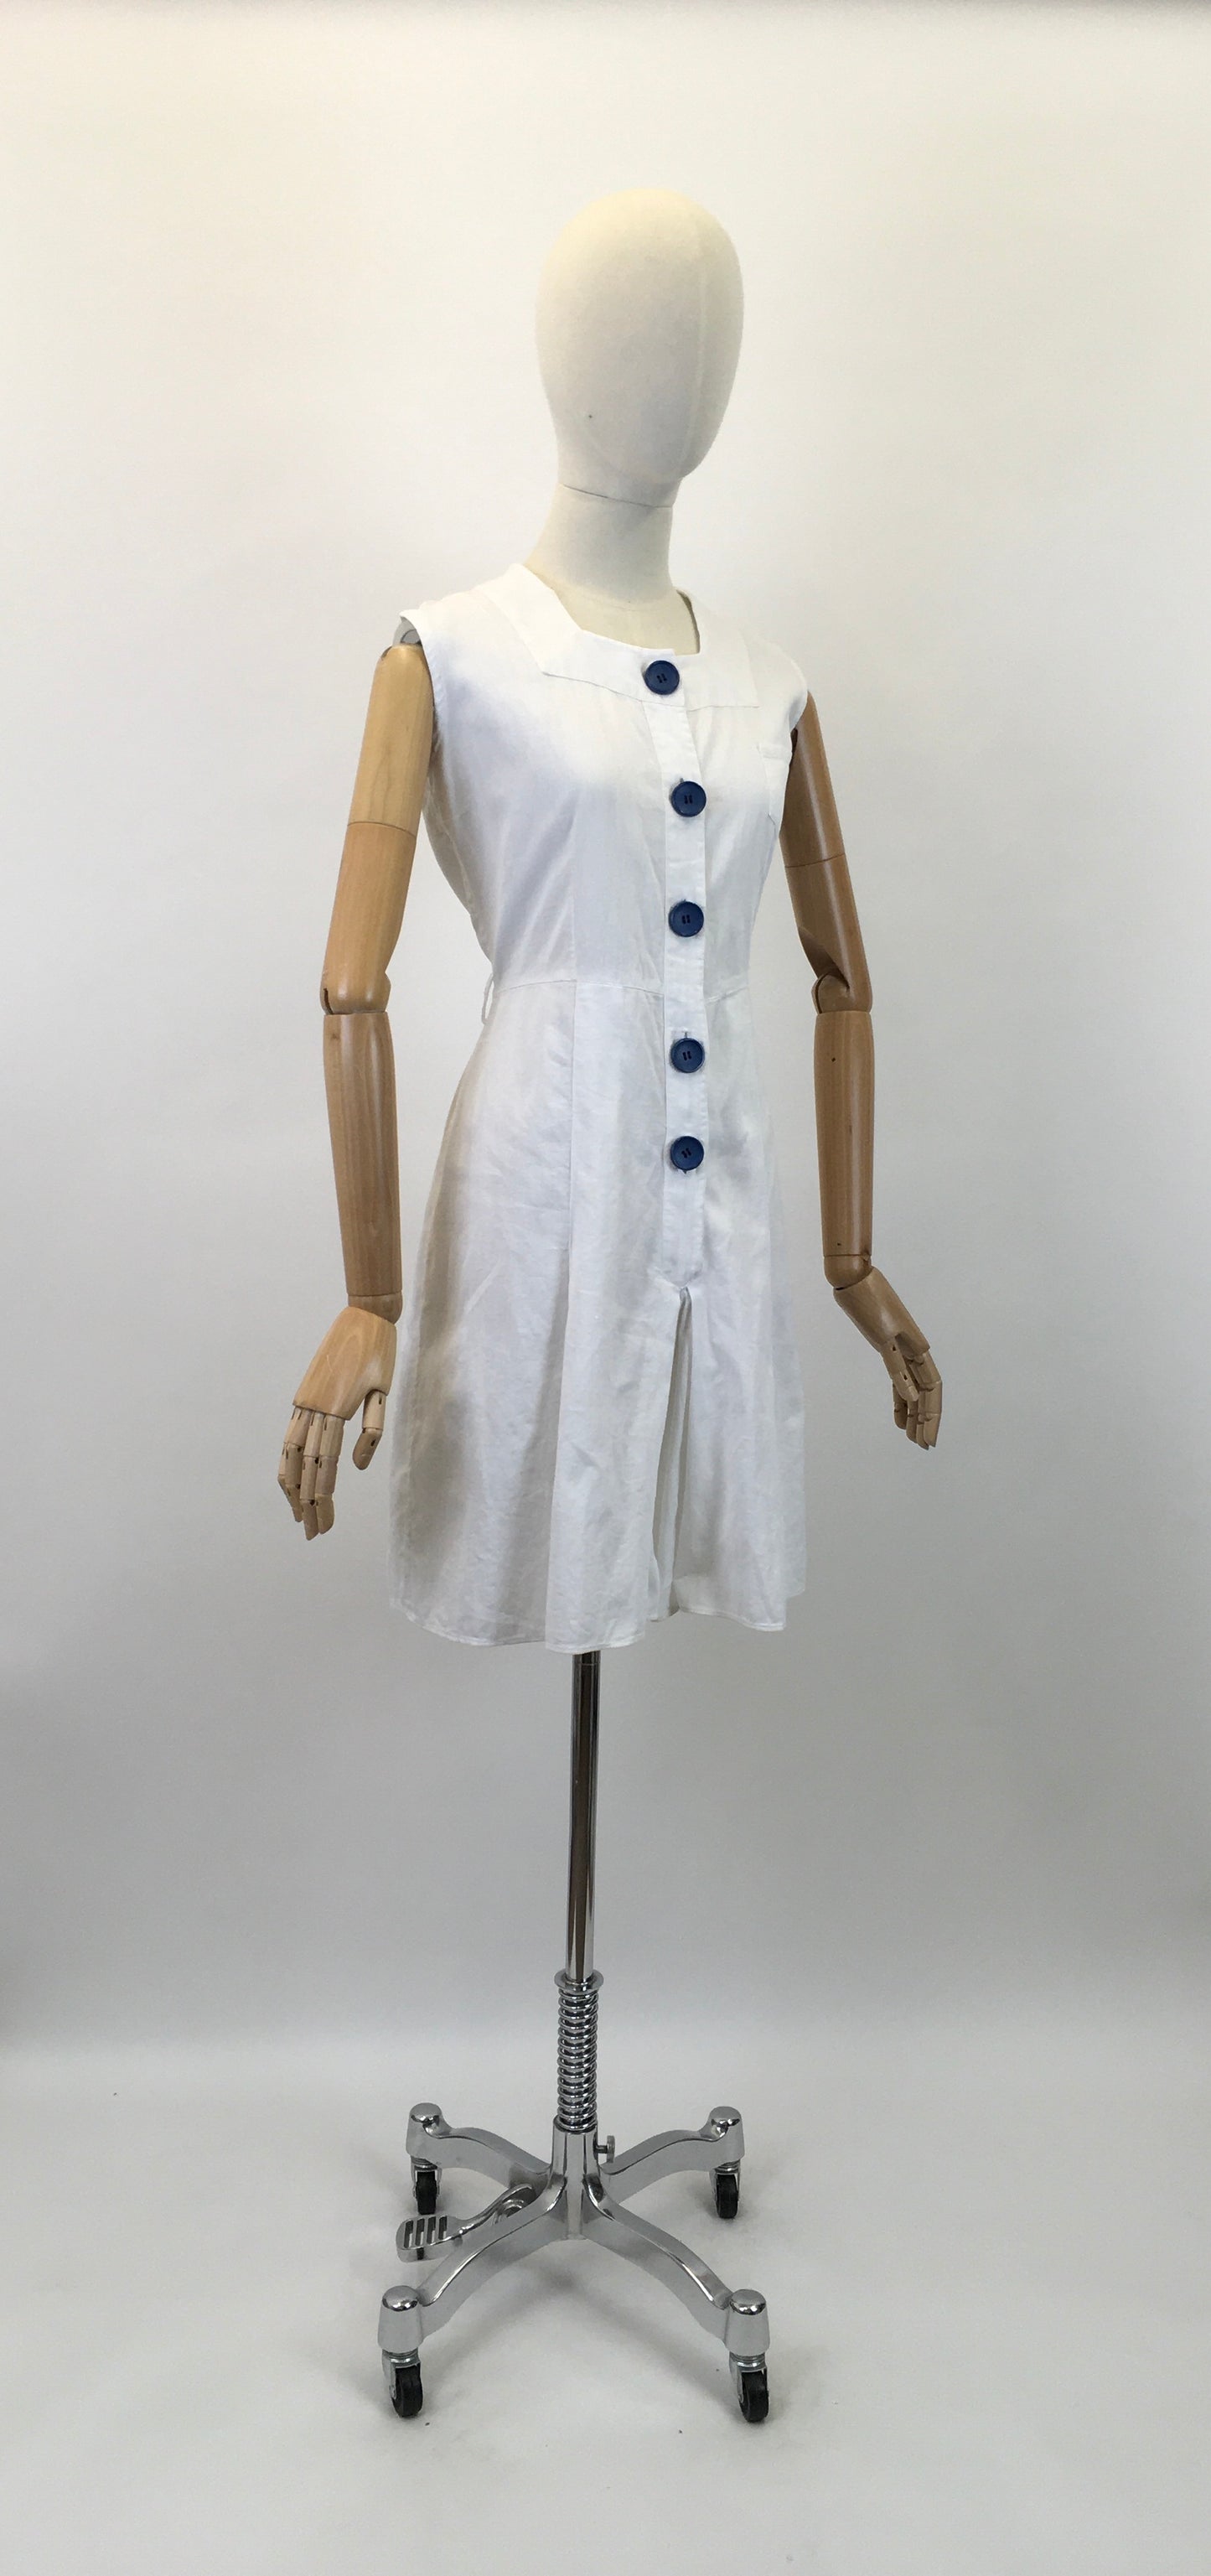 Original 1940's Stunning Off White Sportsuit - With Contrast Blue Buttons